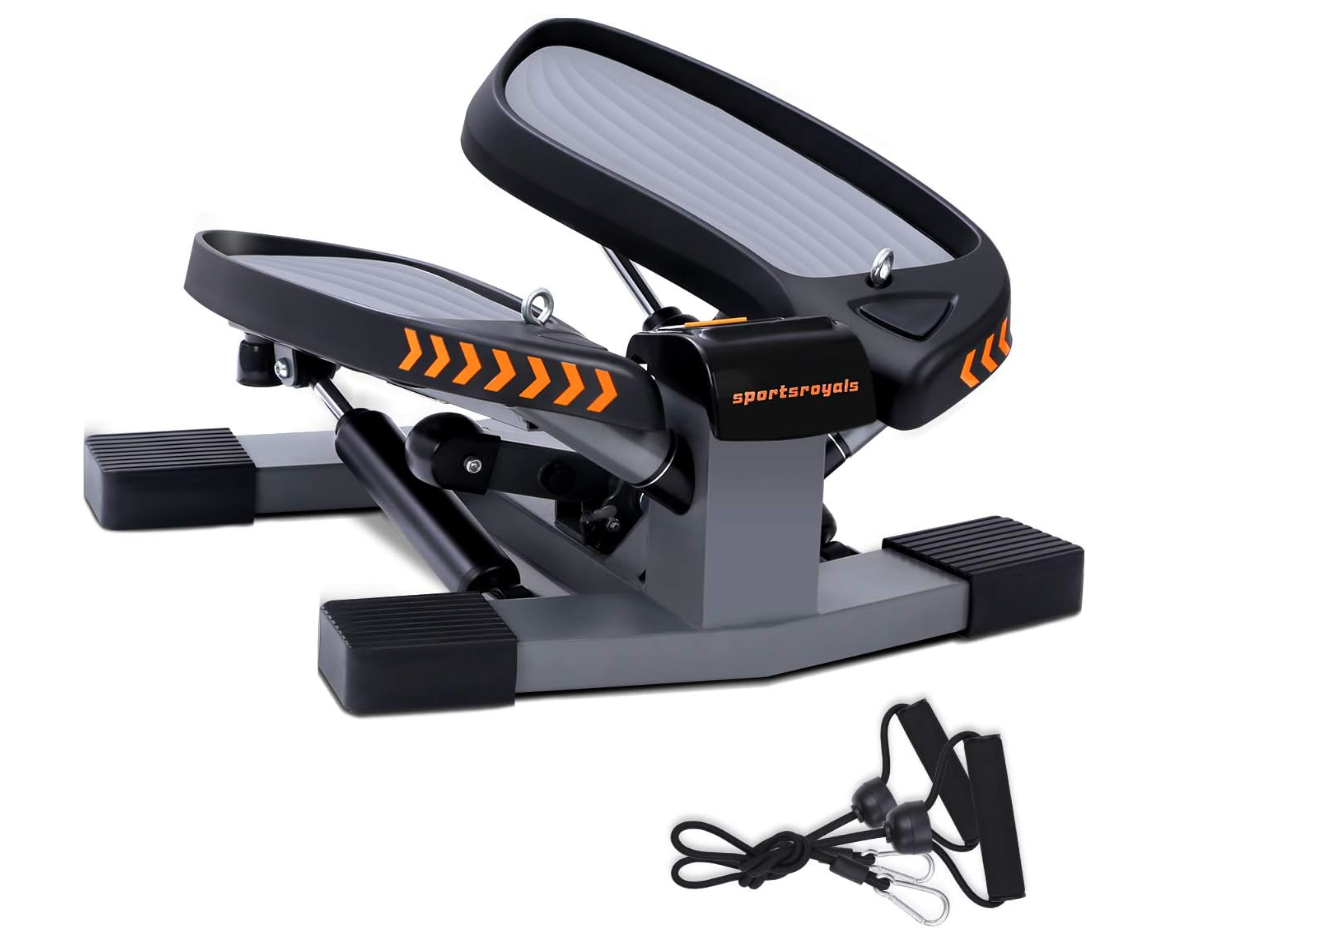 The sportsroyals stair stepper for at-home workouts with included resistance bands